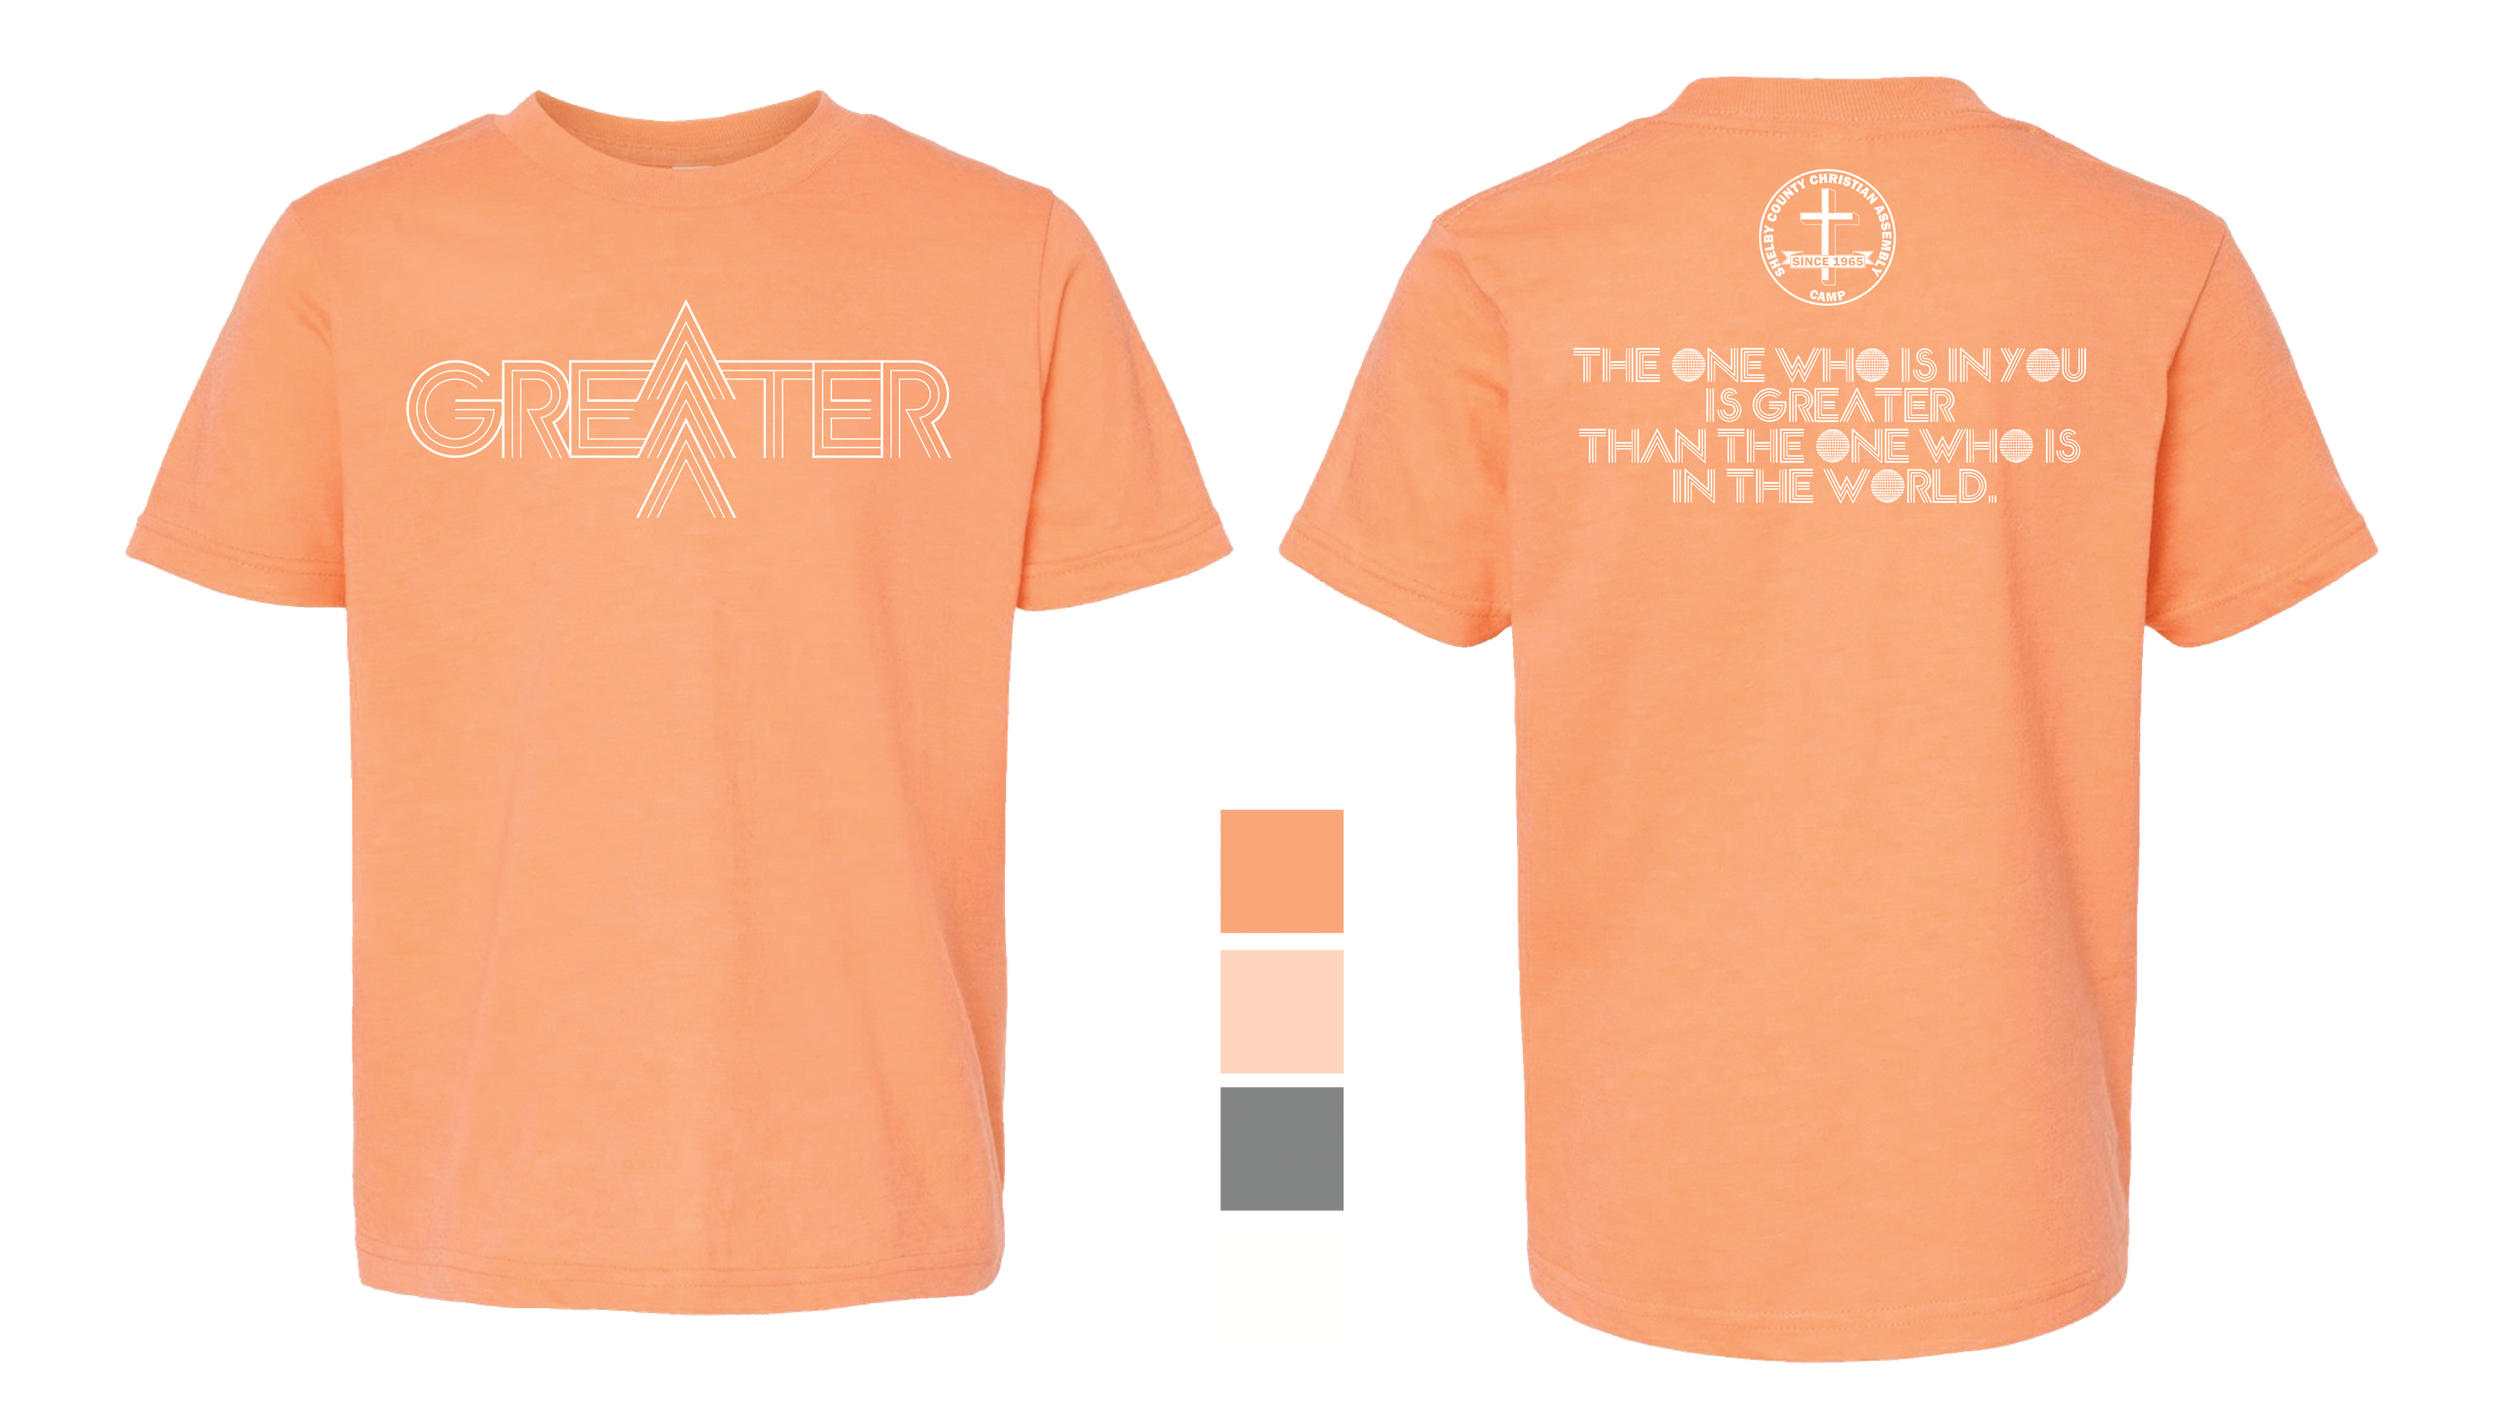 SCCA - GREATER - shirt proof.png